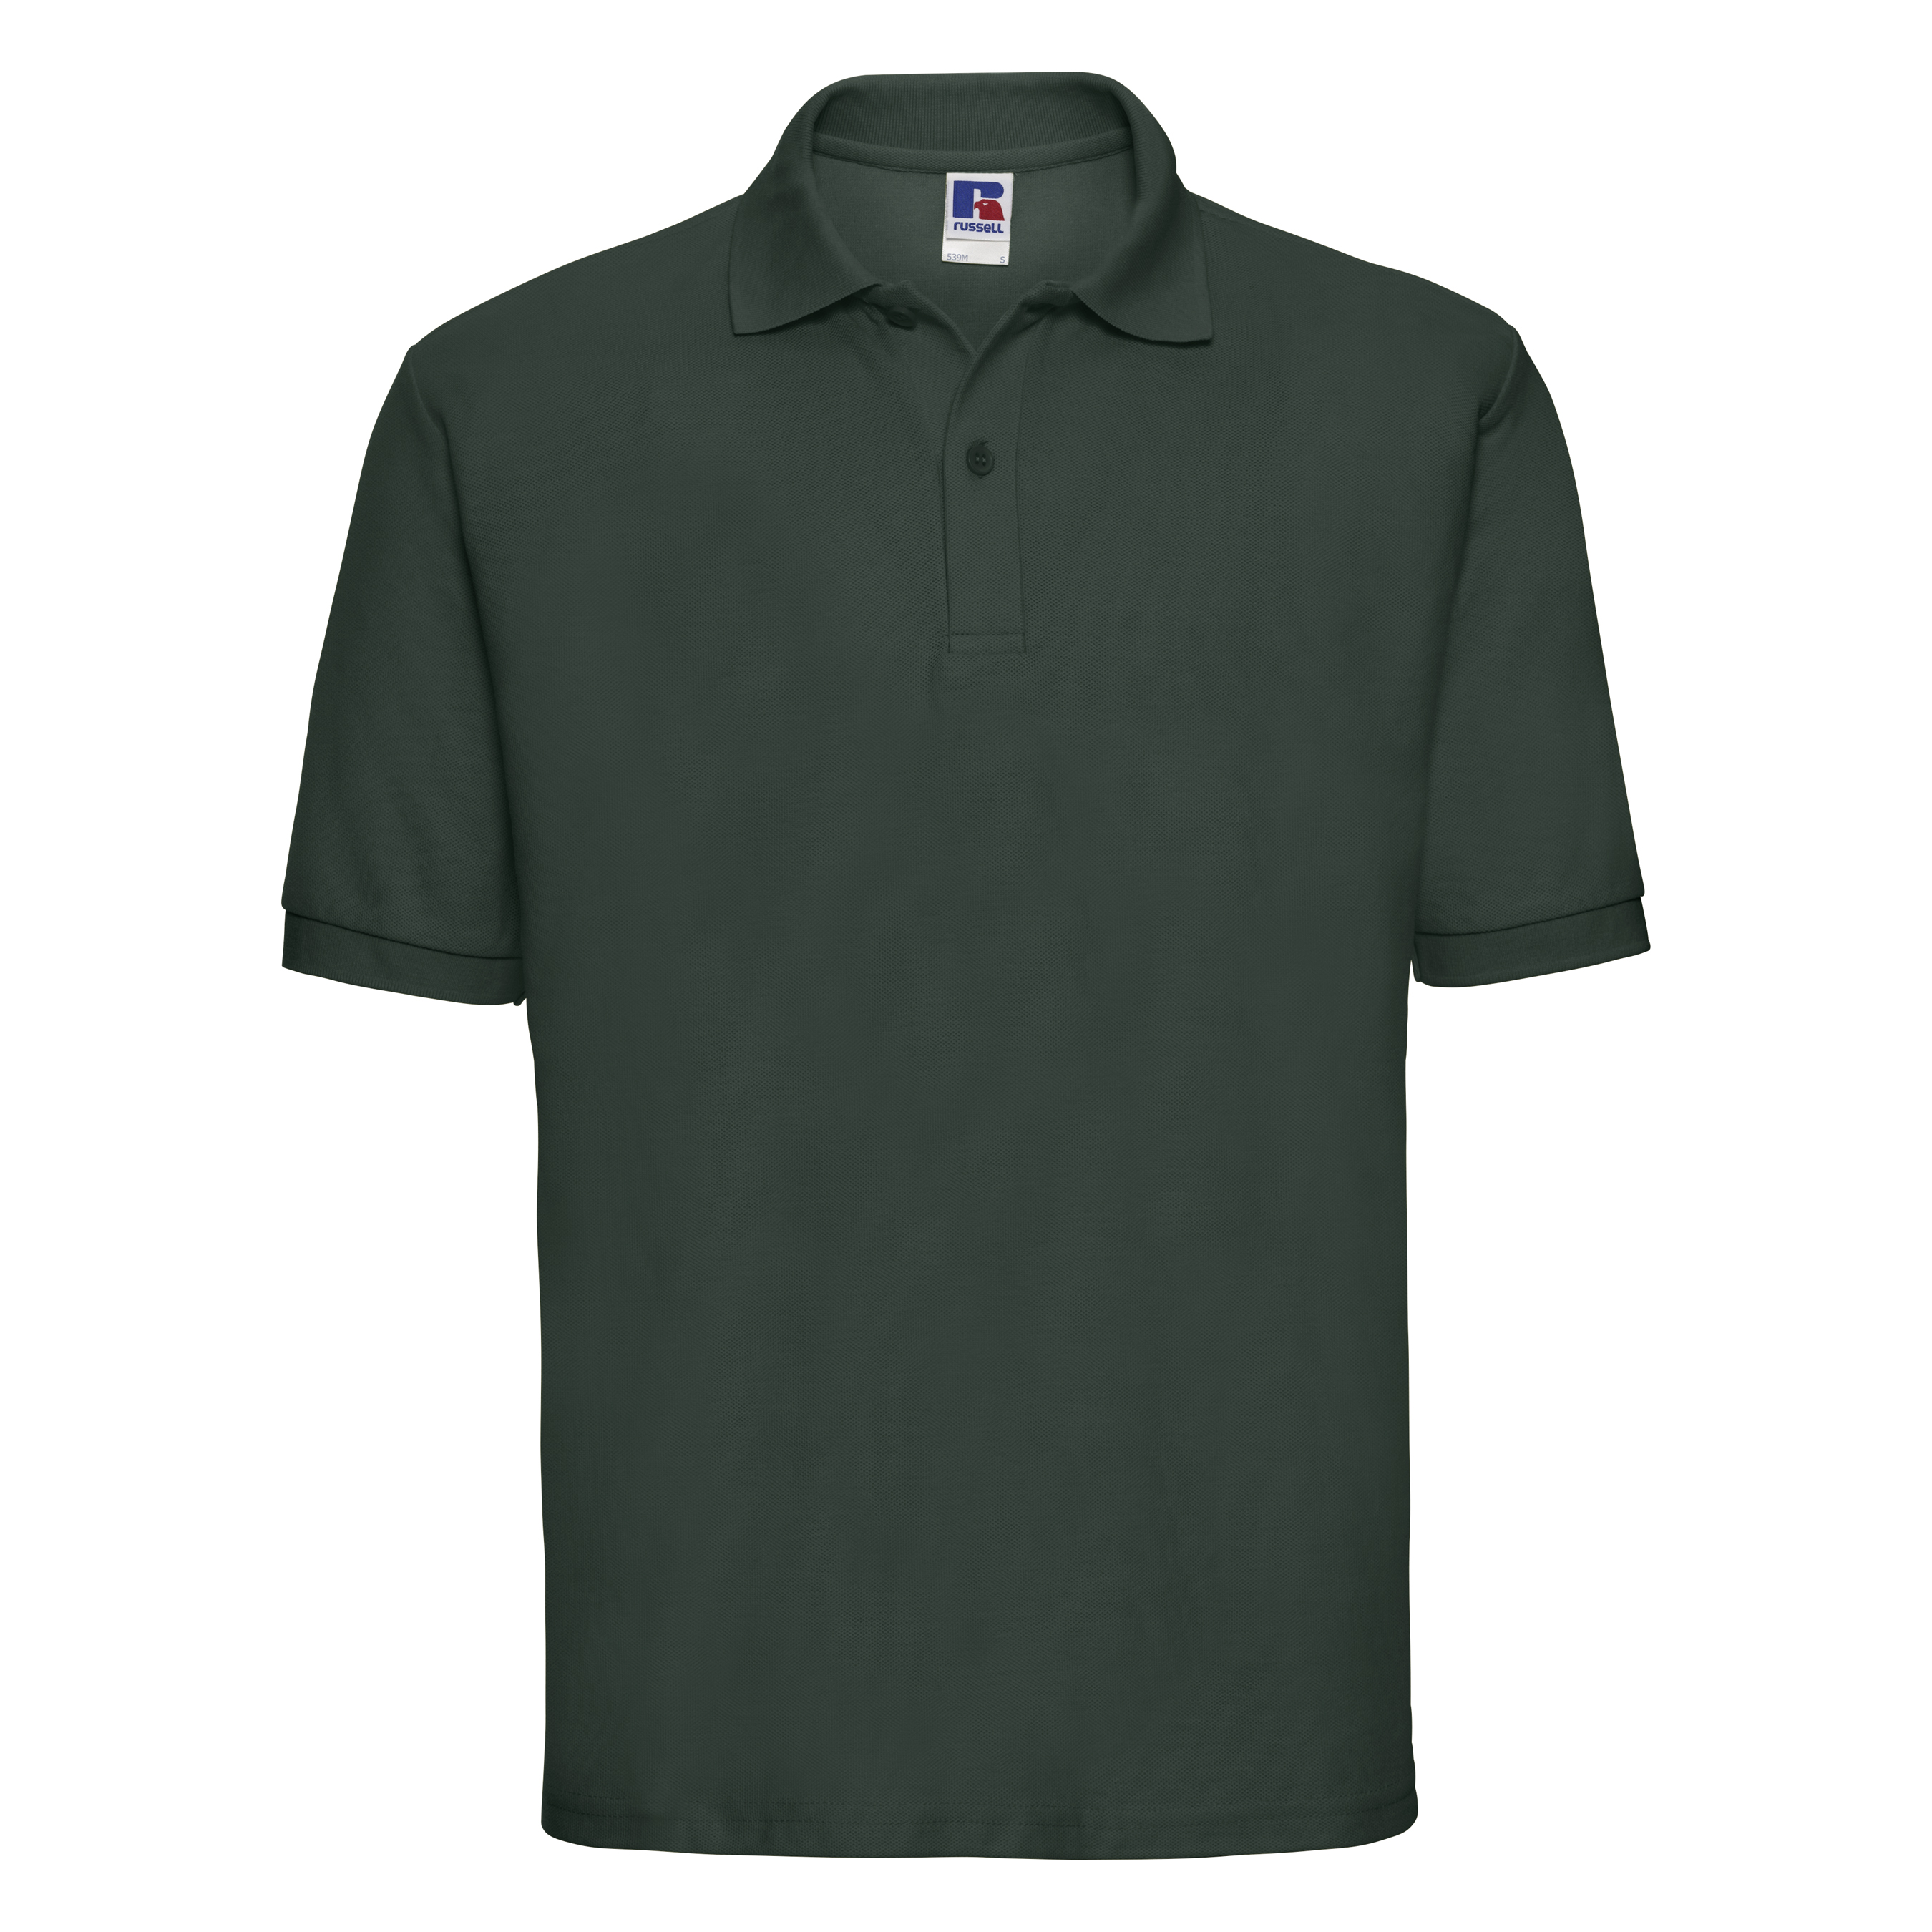 ax-httpswebsystems.s3.amazonaws.comtmp_for_downloadrussell-classic-polycotton-polo-bottle-green.jpg